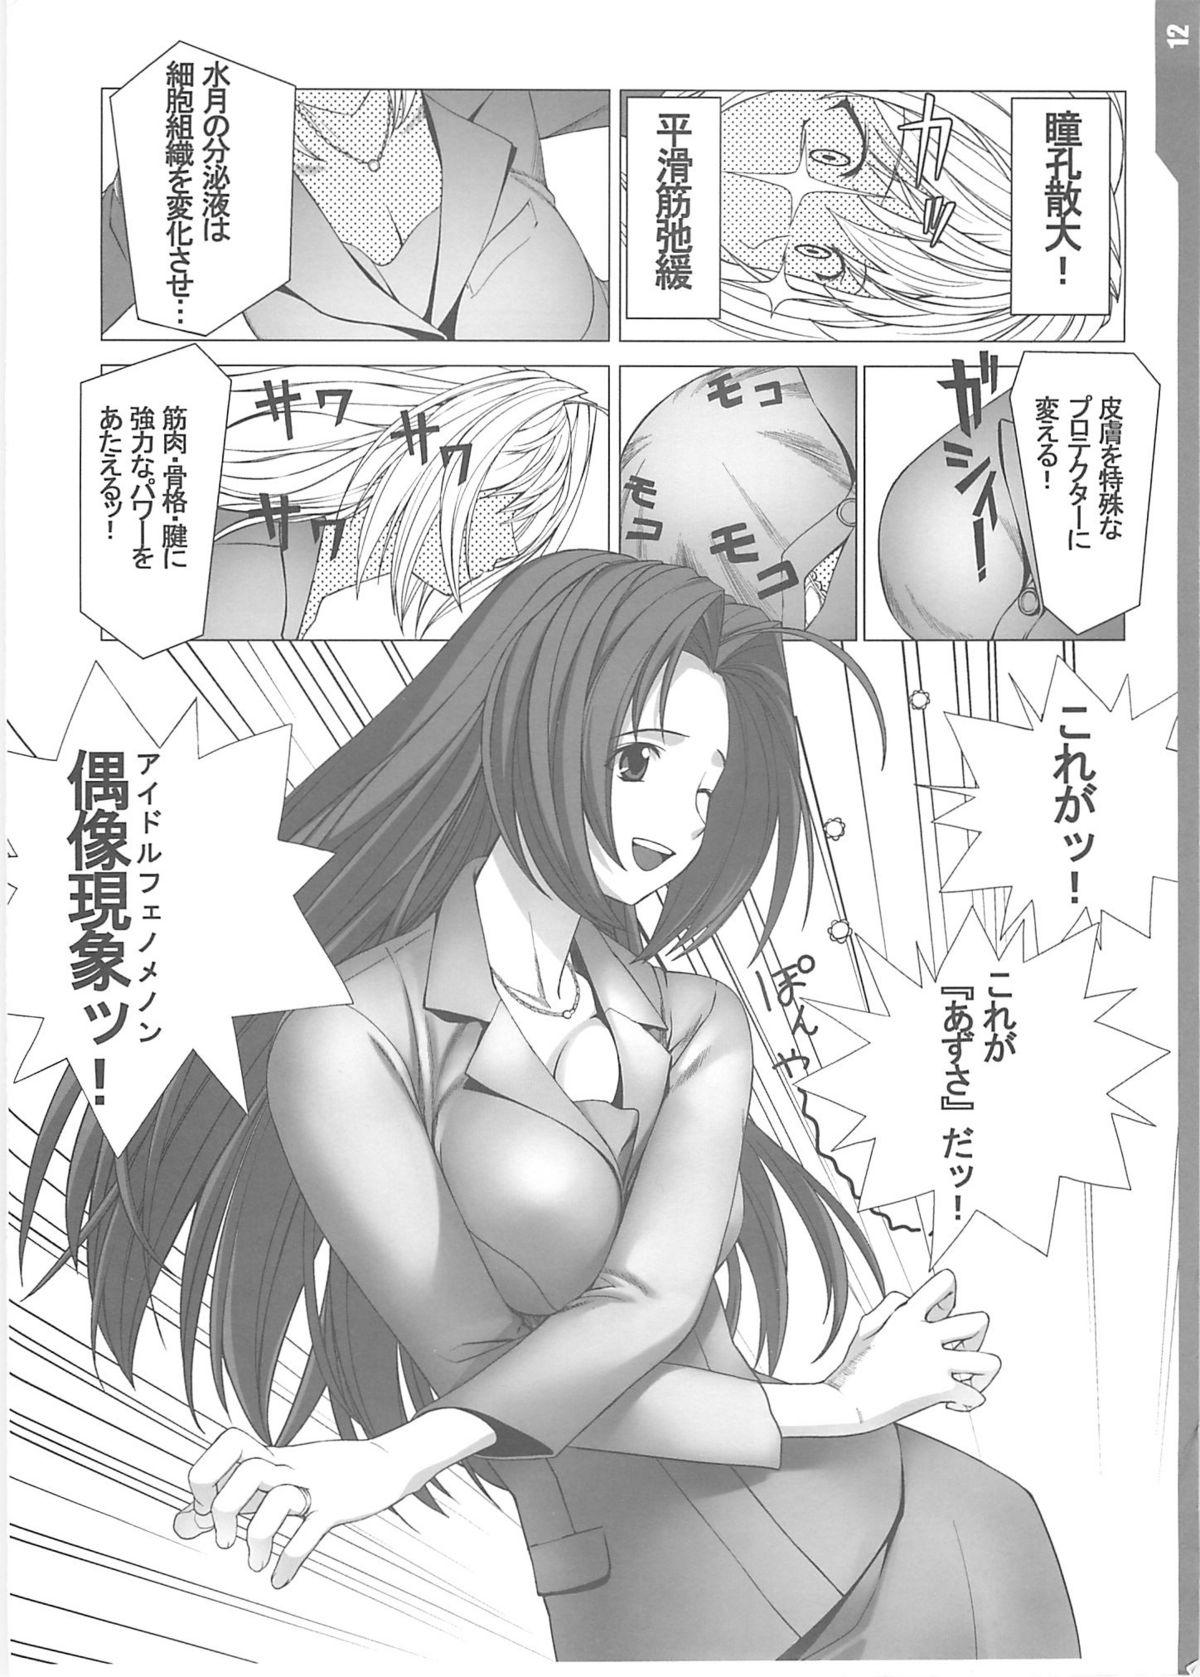 Huge Dick Enikki Recycle 7 no Omake Hon - Beat Angel - The idolmaster Sister - Page 12